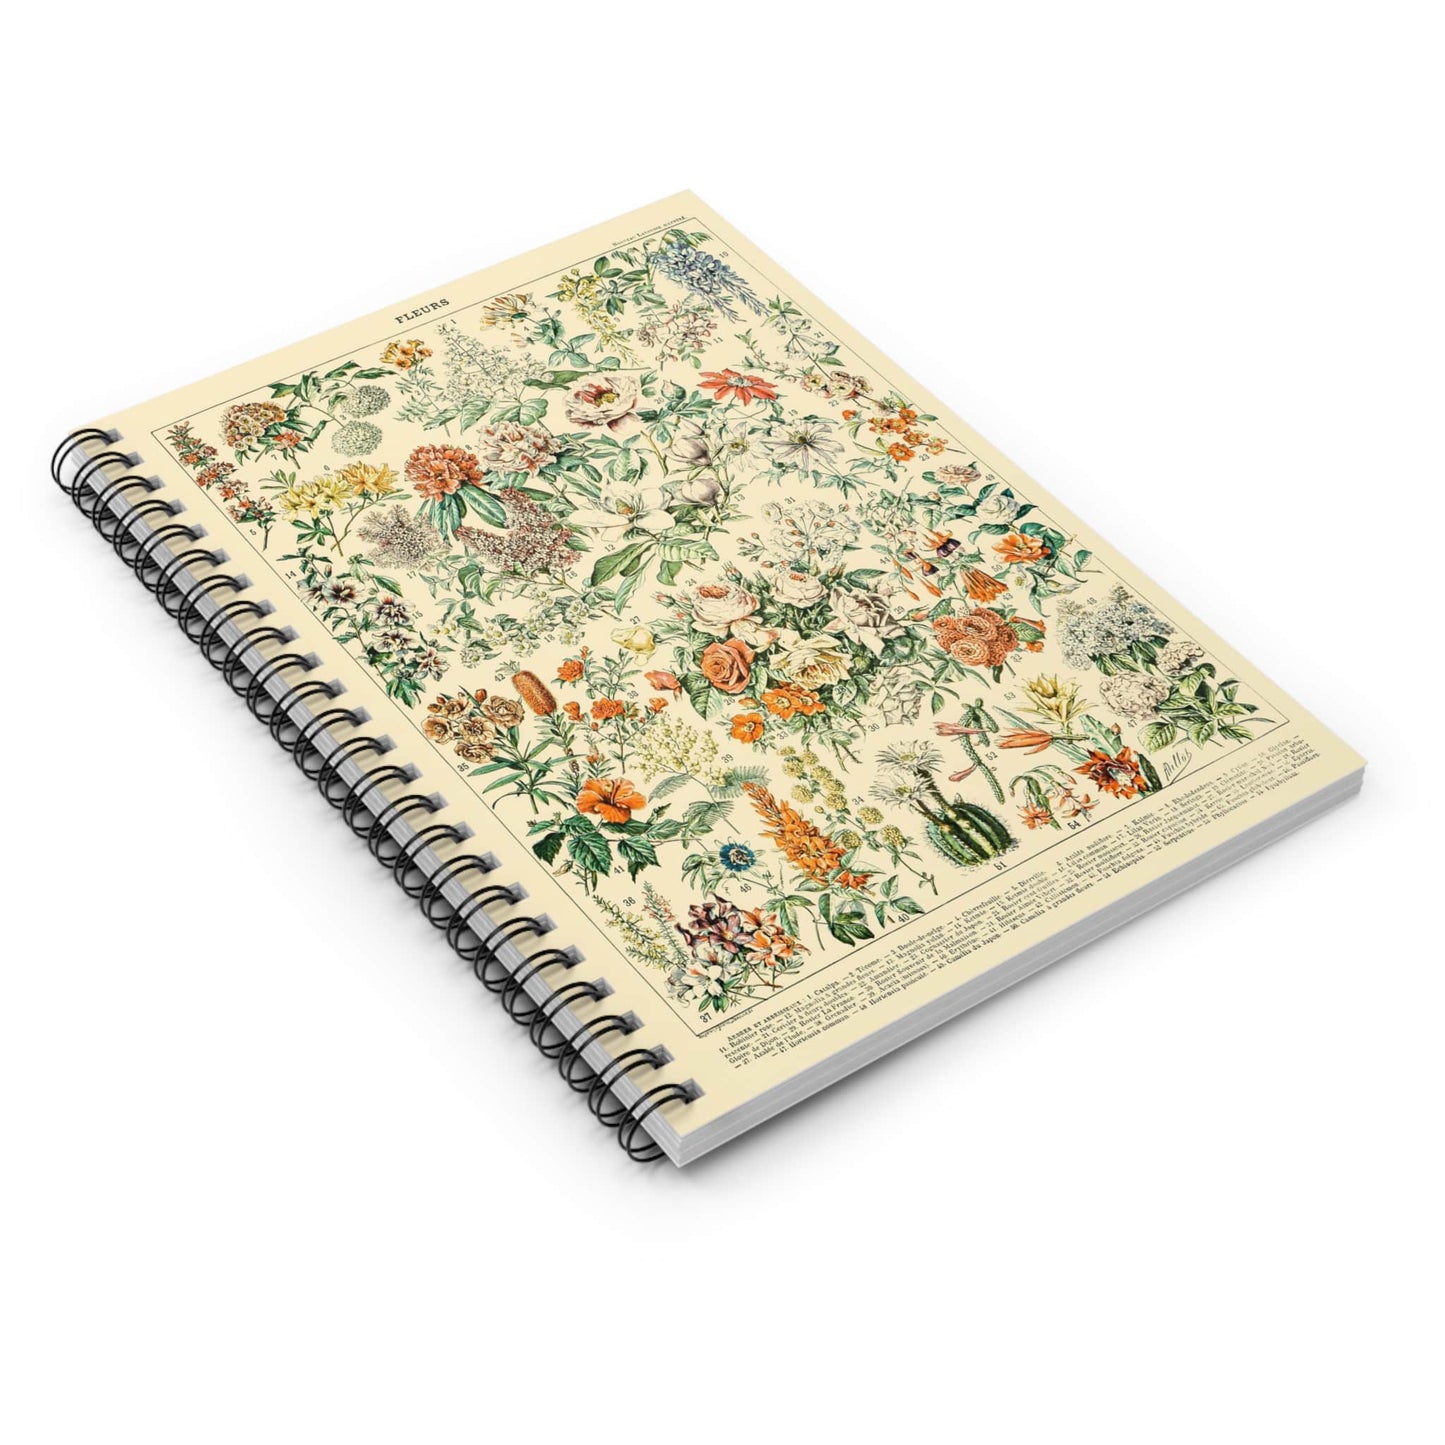 Flowers and Plants Spiral Notebook Laying Flat on White Surface